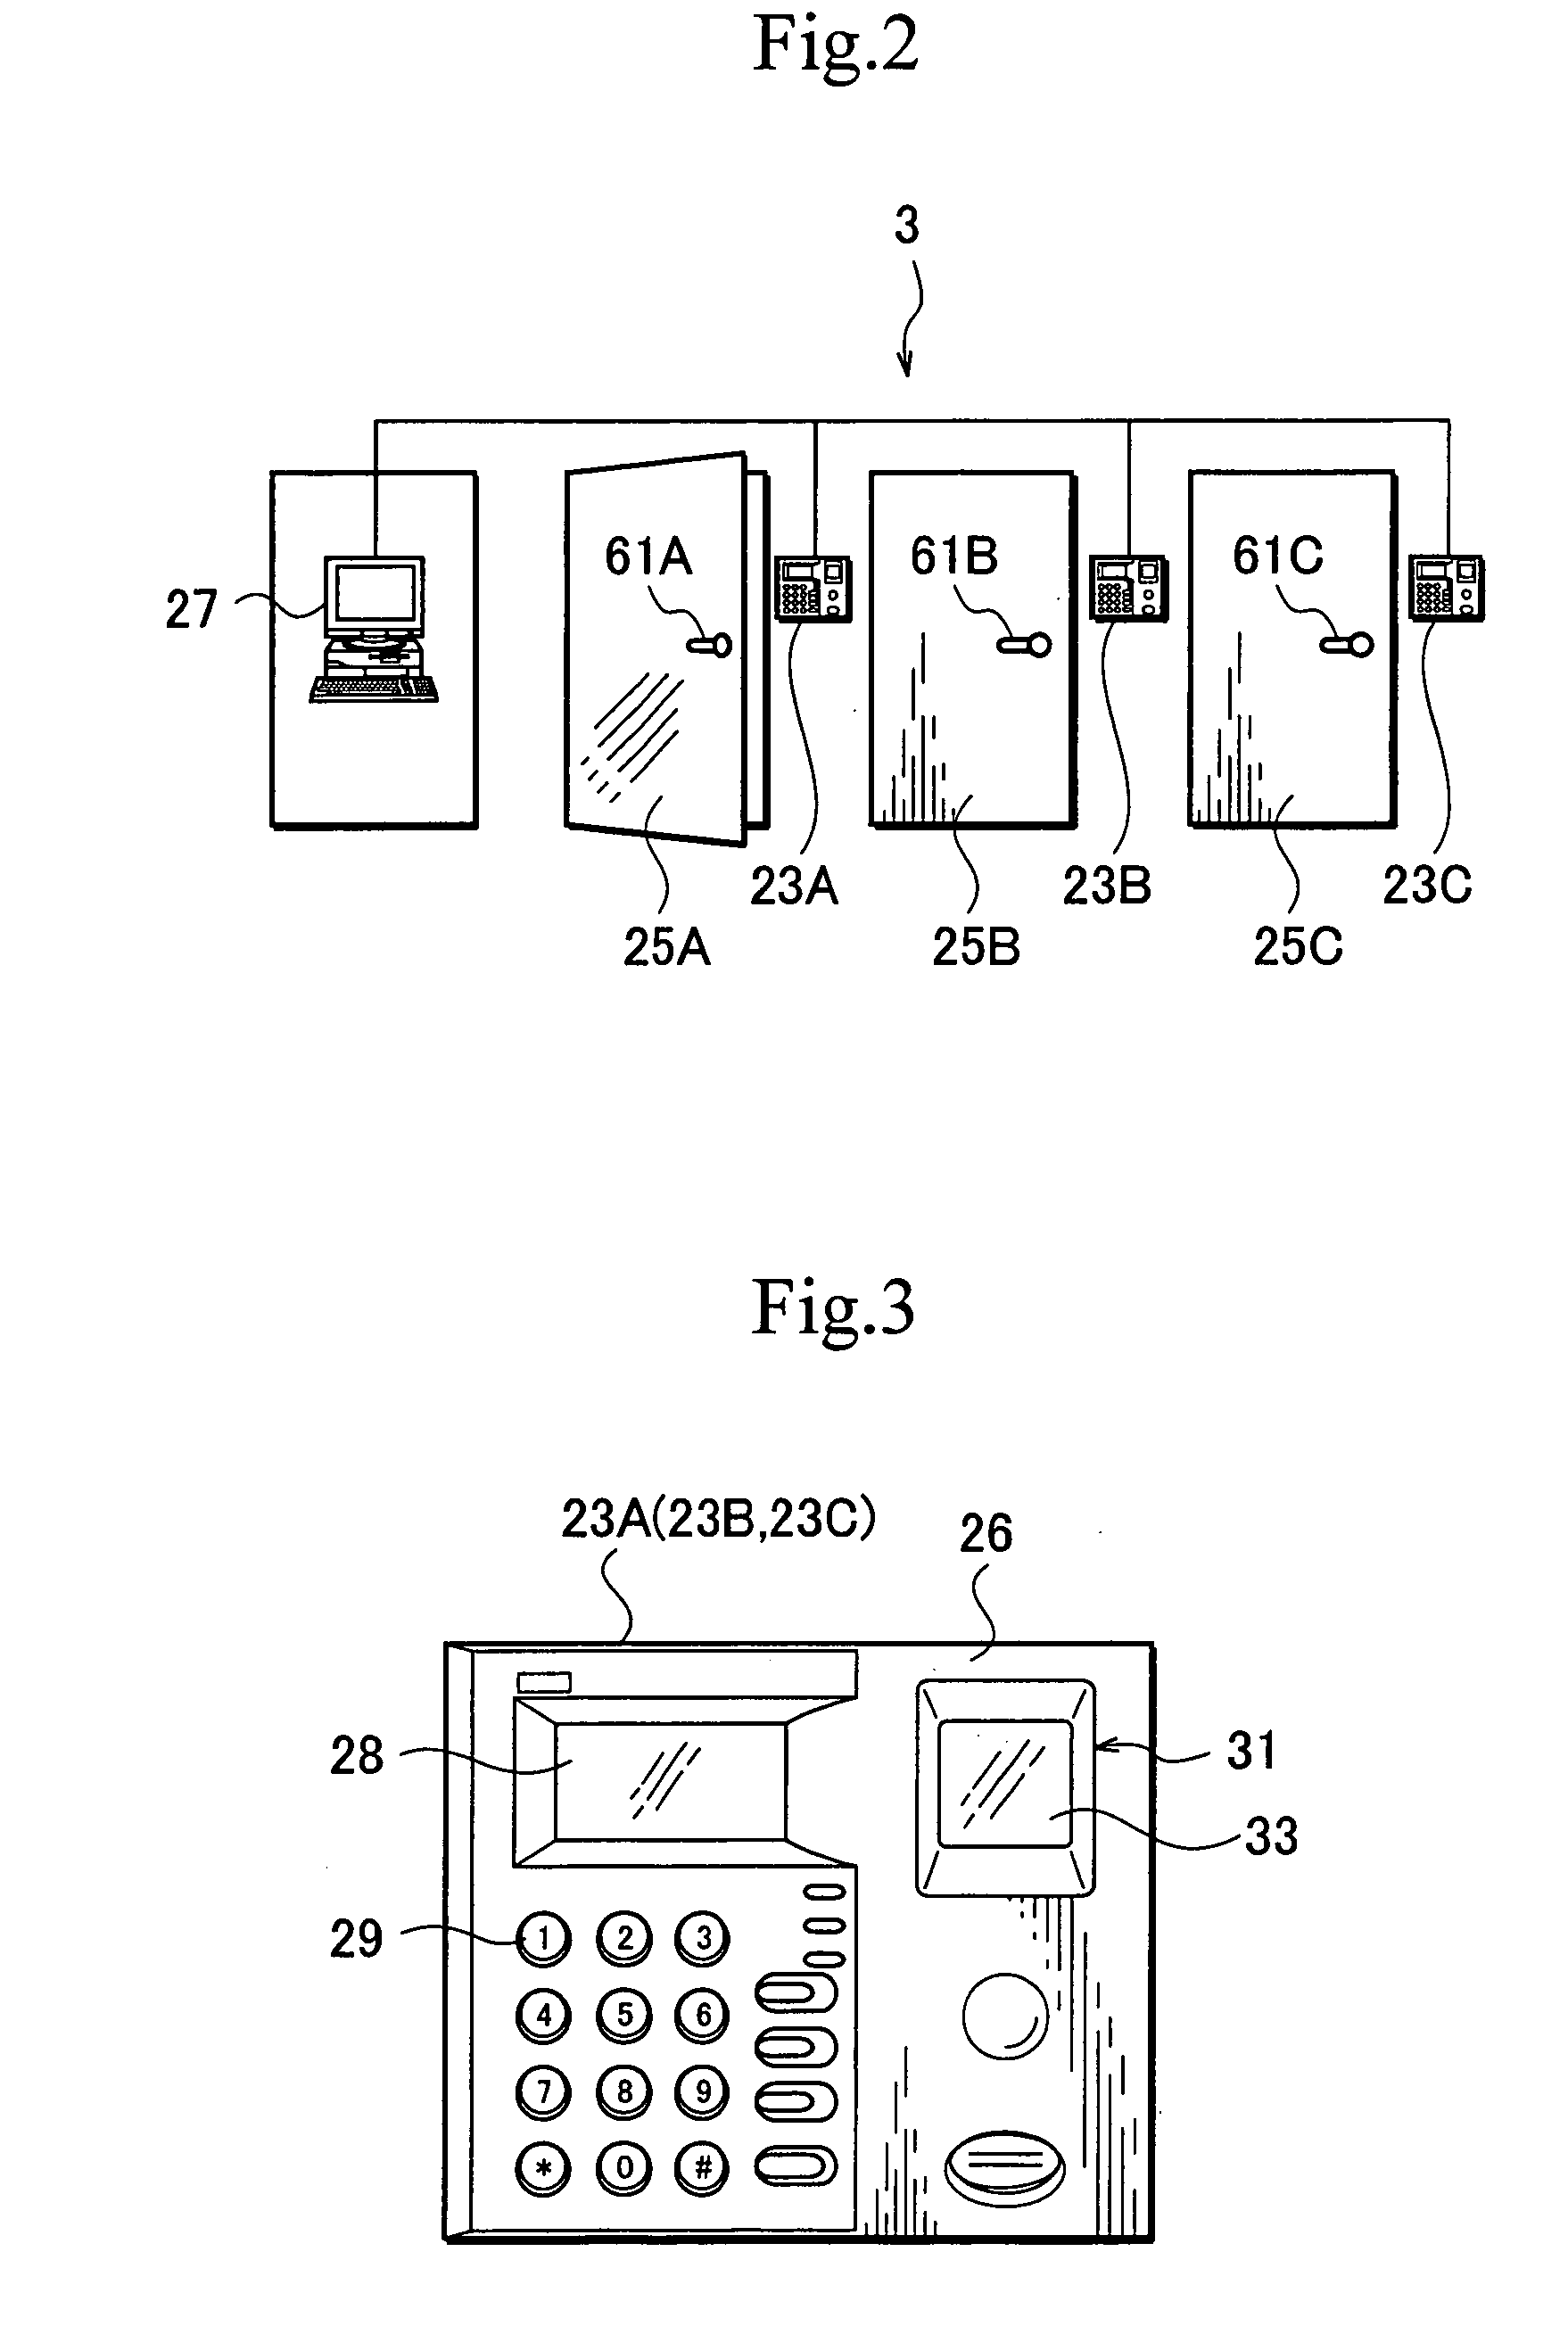 Personal authentication apparatus and locking apparatus